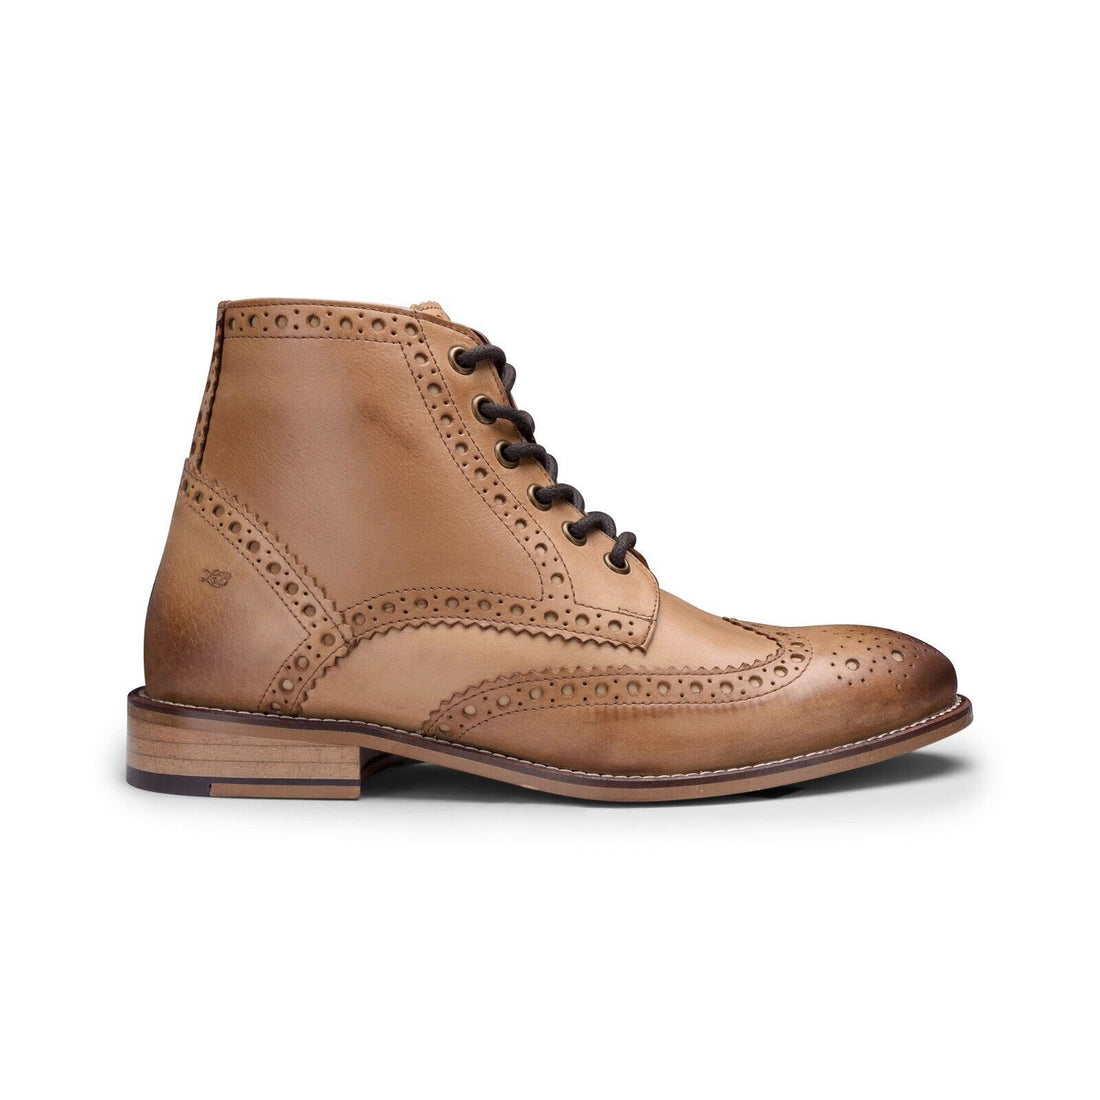 Mens Classic Oxford Tan Leather Gatsby Brogue Ankle Boots - Upperclass Fashions 